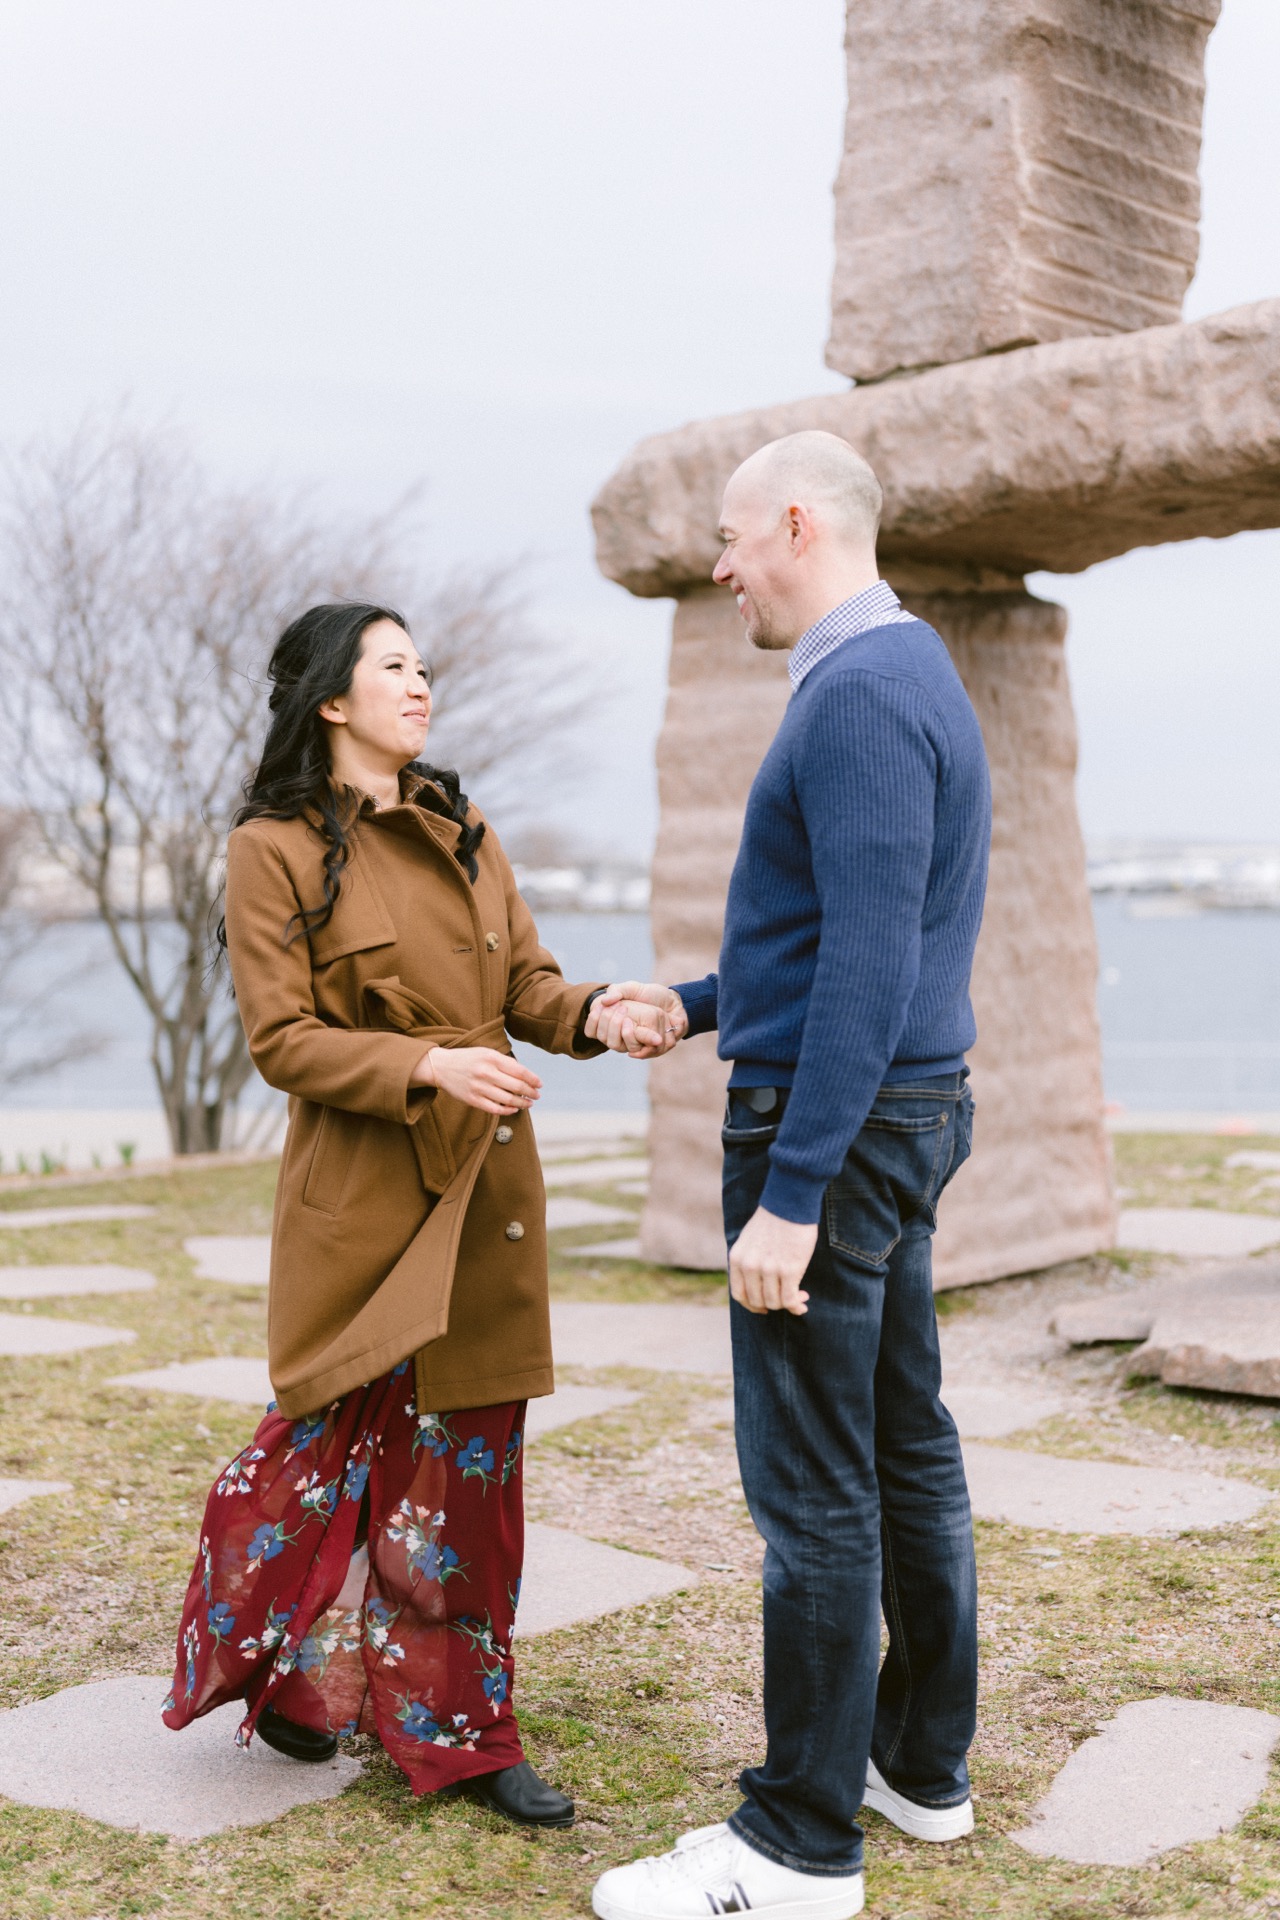 A couple holding hands standing face-to-face outdoors near a stone structure.